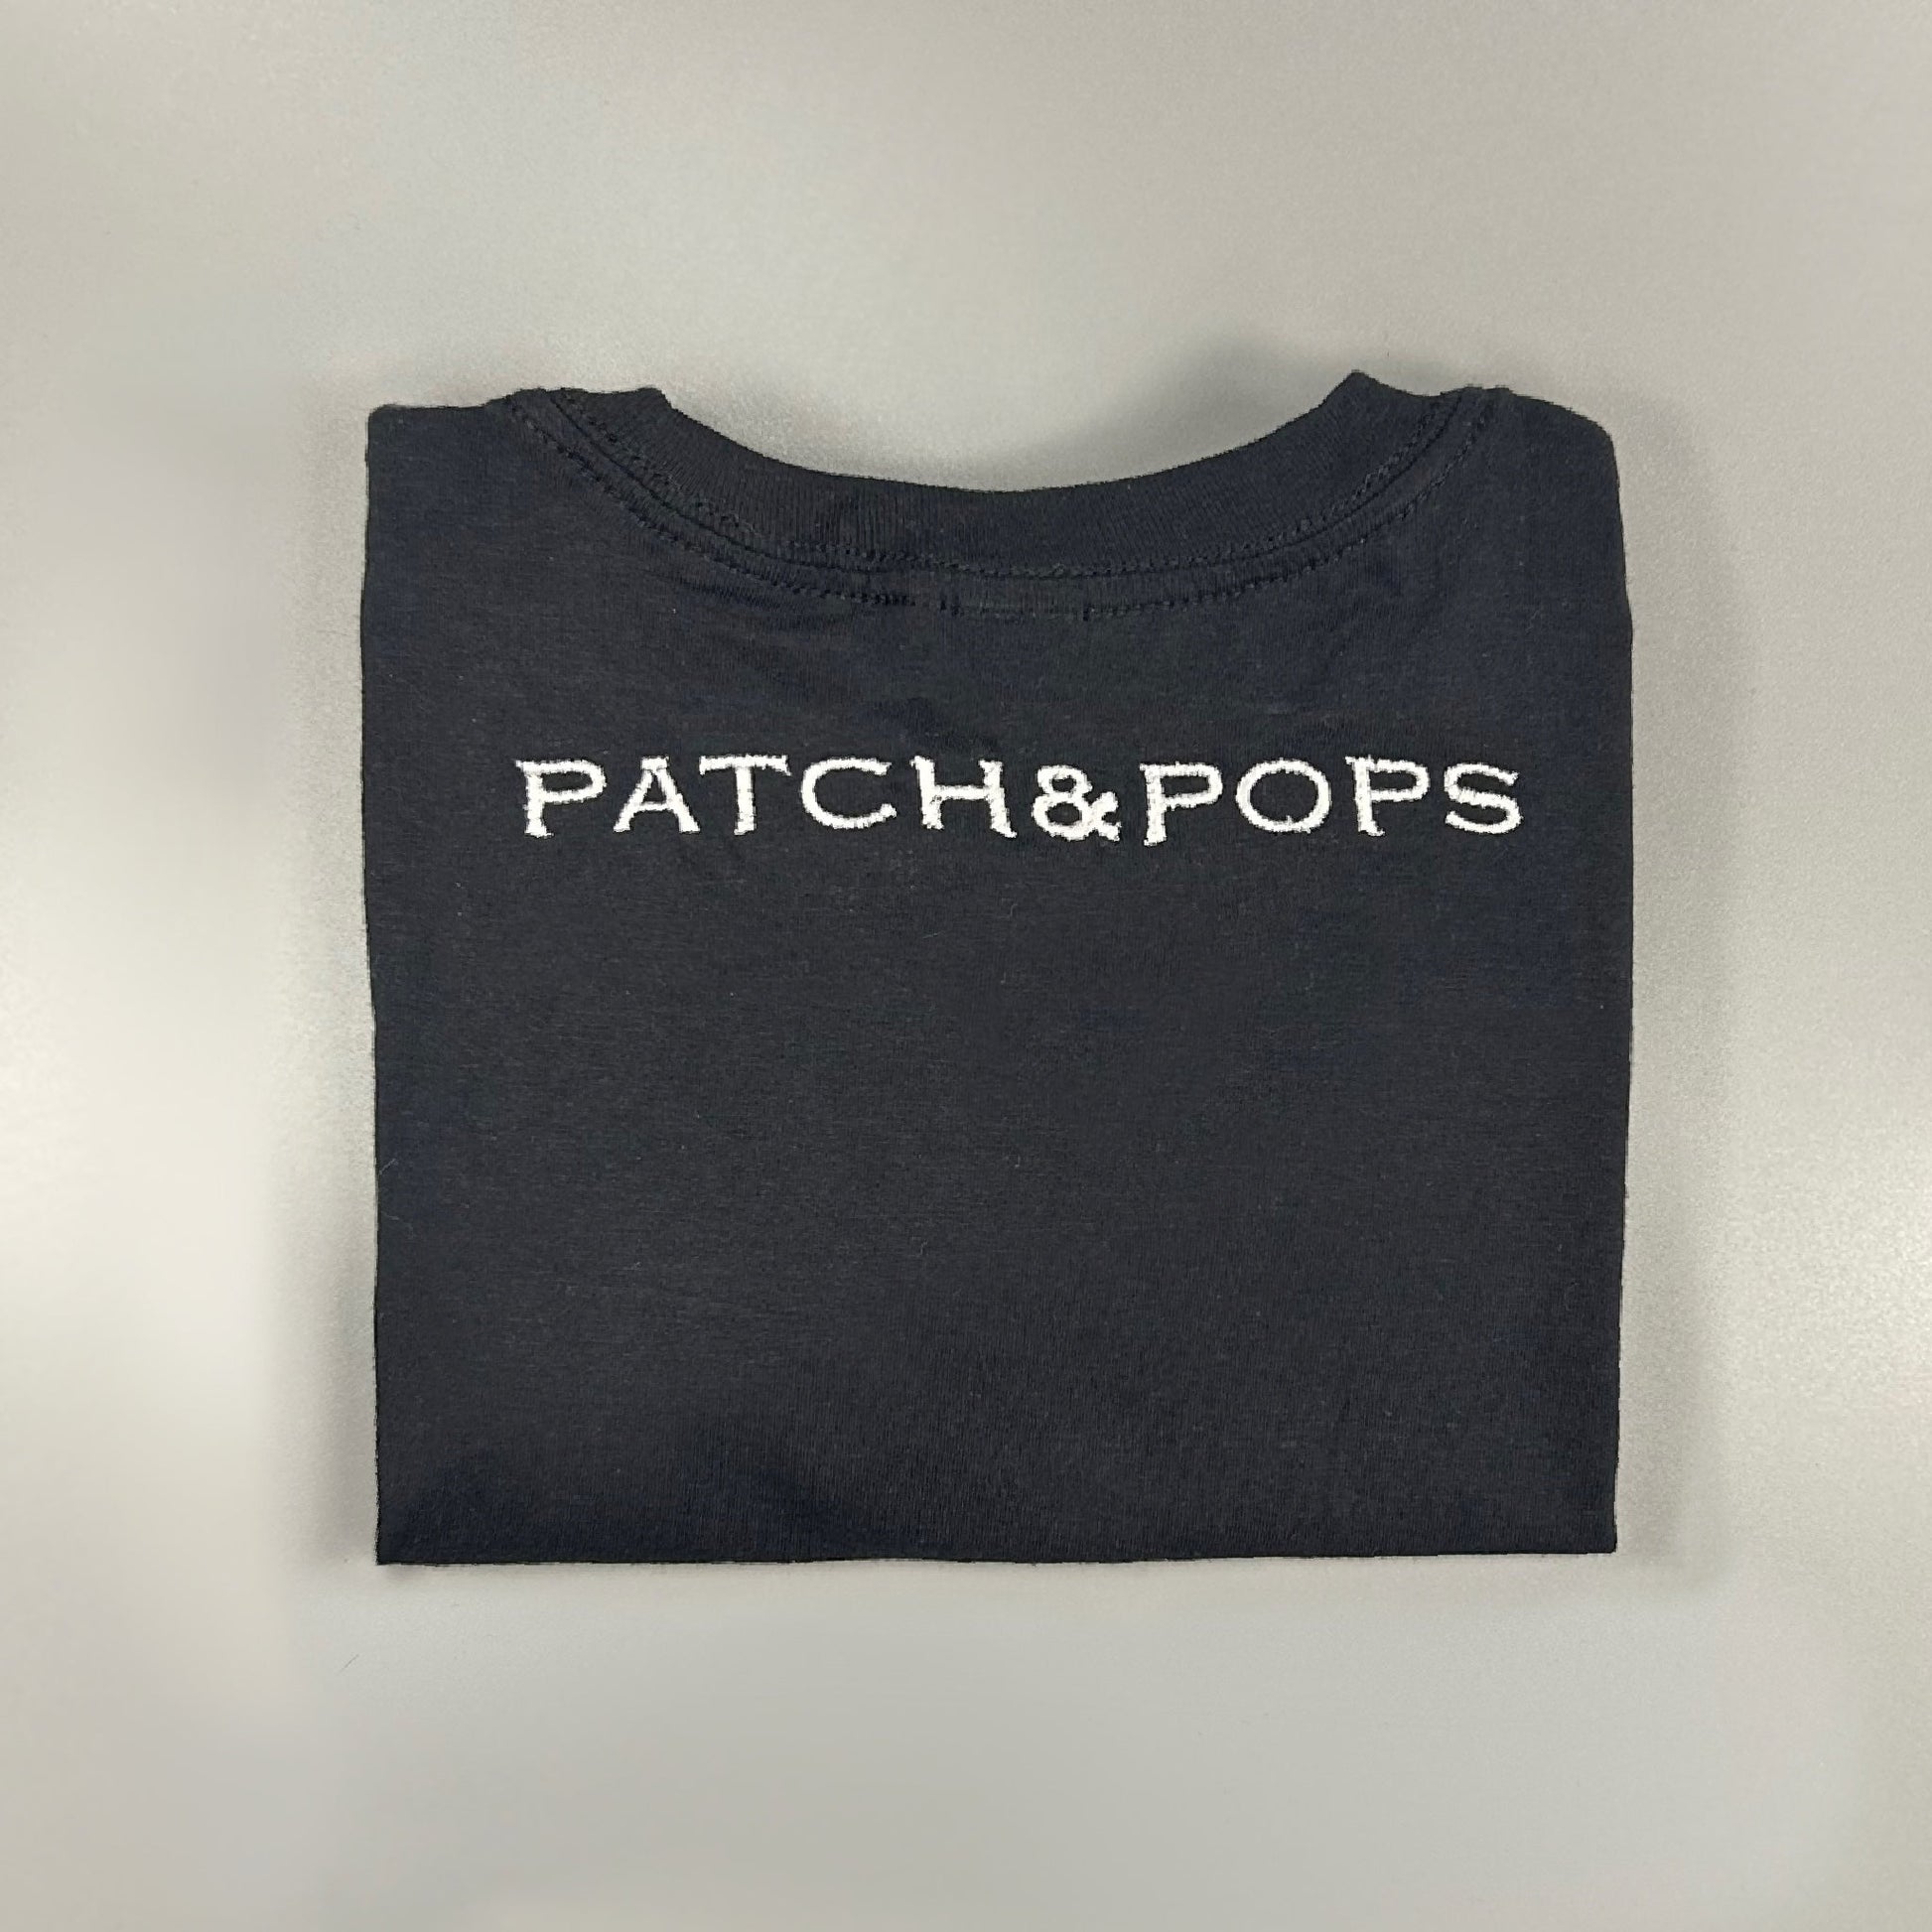 Patch&PopsBoutique FREE Branded Tee (when you order 3 other items from the merch collection)